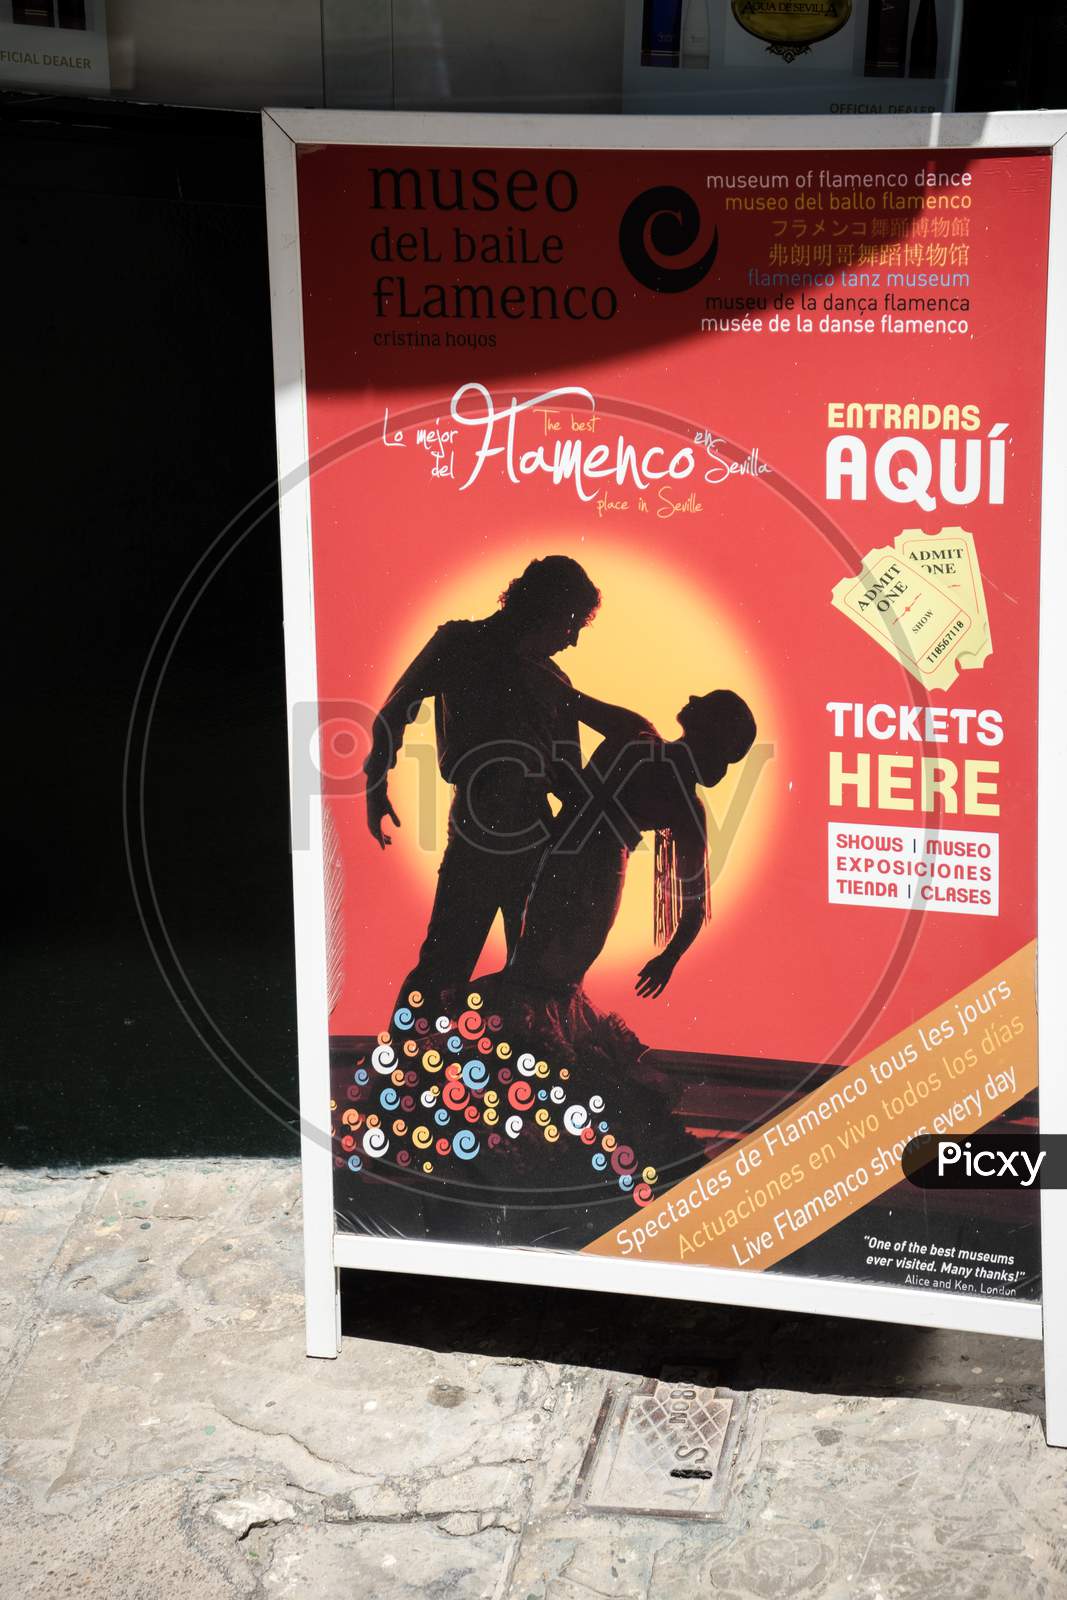 Seville, Spain, 18 June 2017: An Advertisement For A Flamence Dance Program Is Displayed Outside On The Street